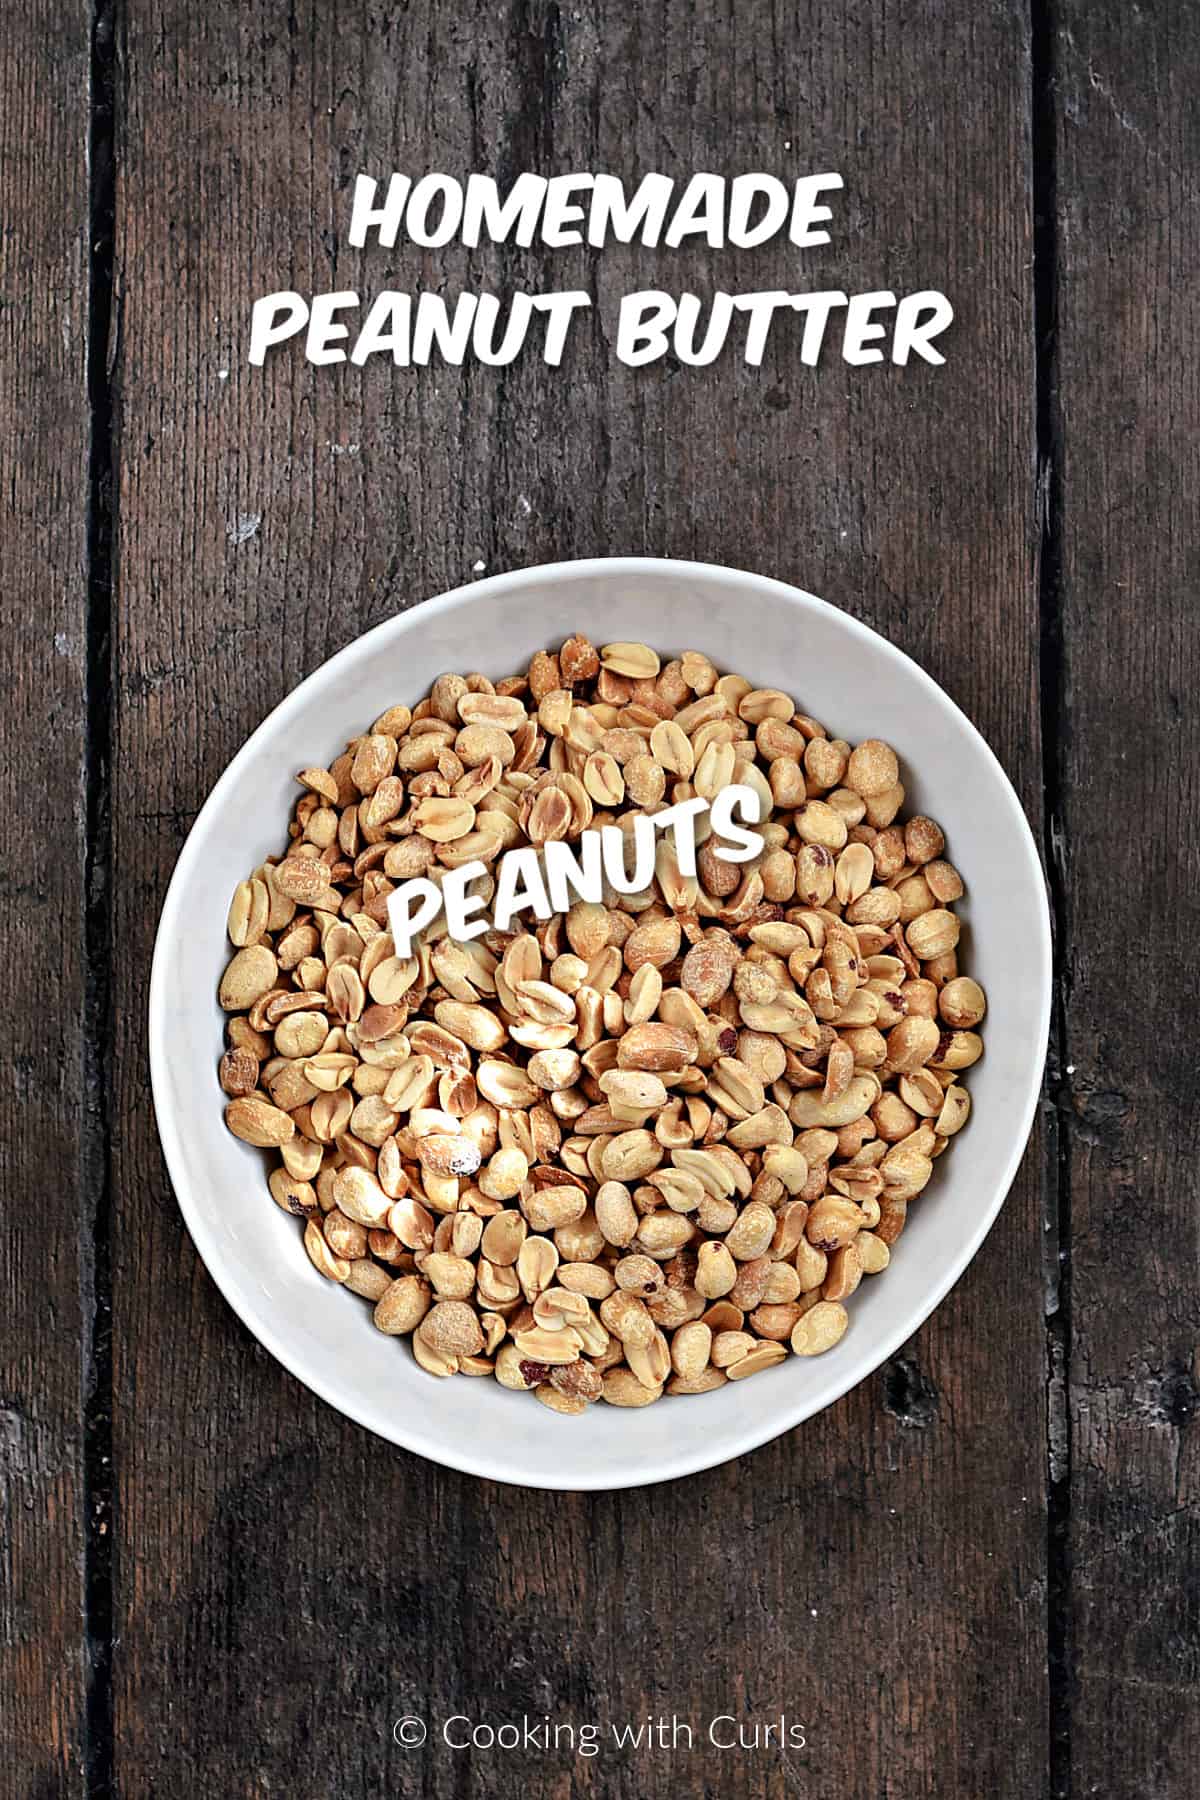 A large bowl of peanuts.